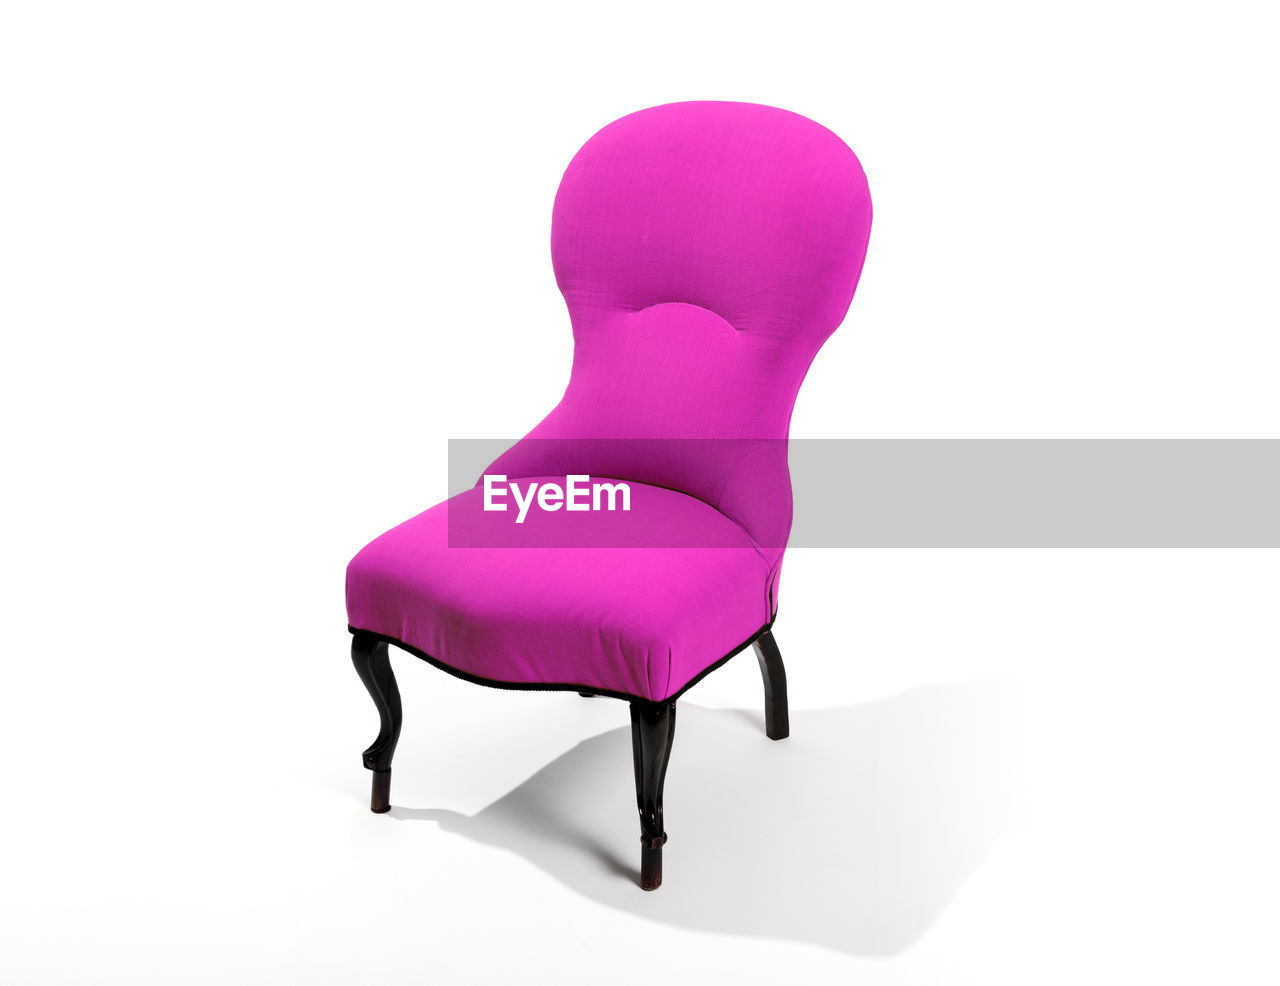 furniture, pink, chair, purple, magenta, indoors, studio shot, cut out, violet, white background, no people, armrest, single object, copy space